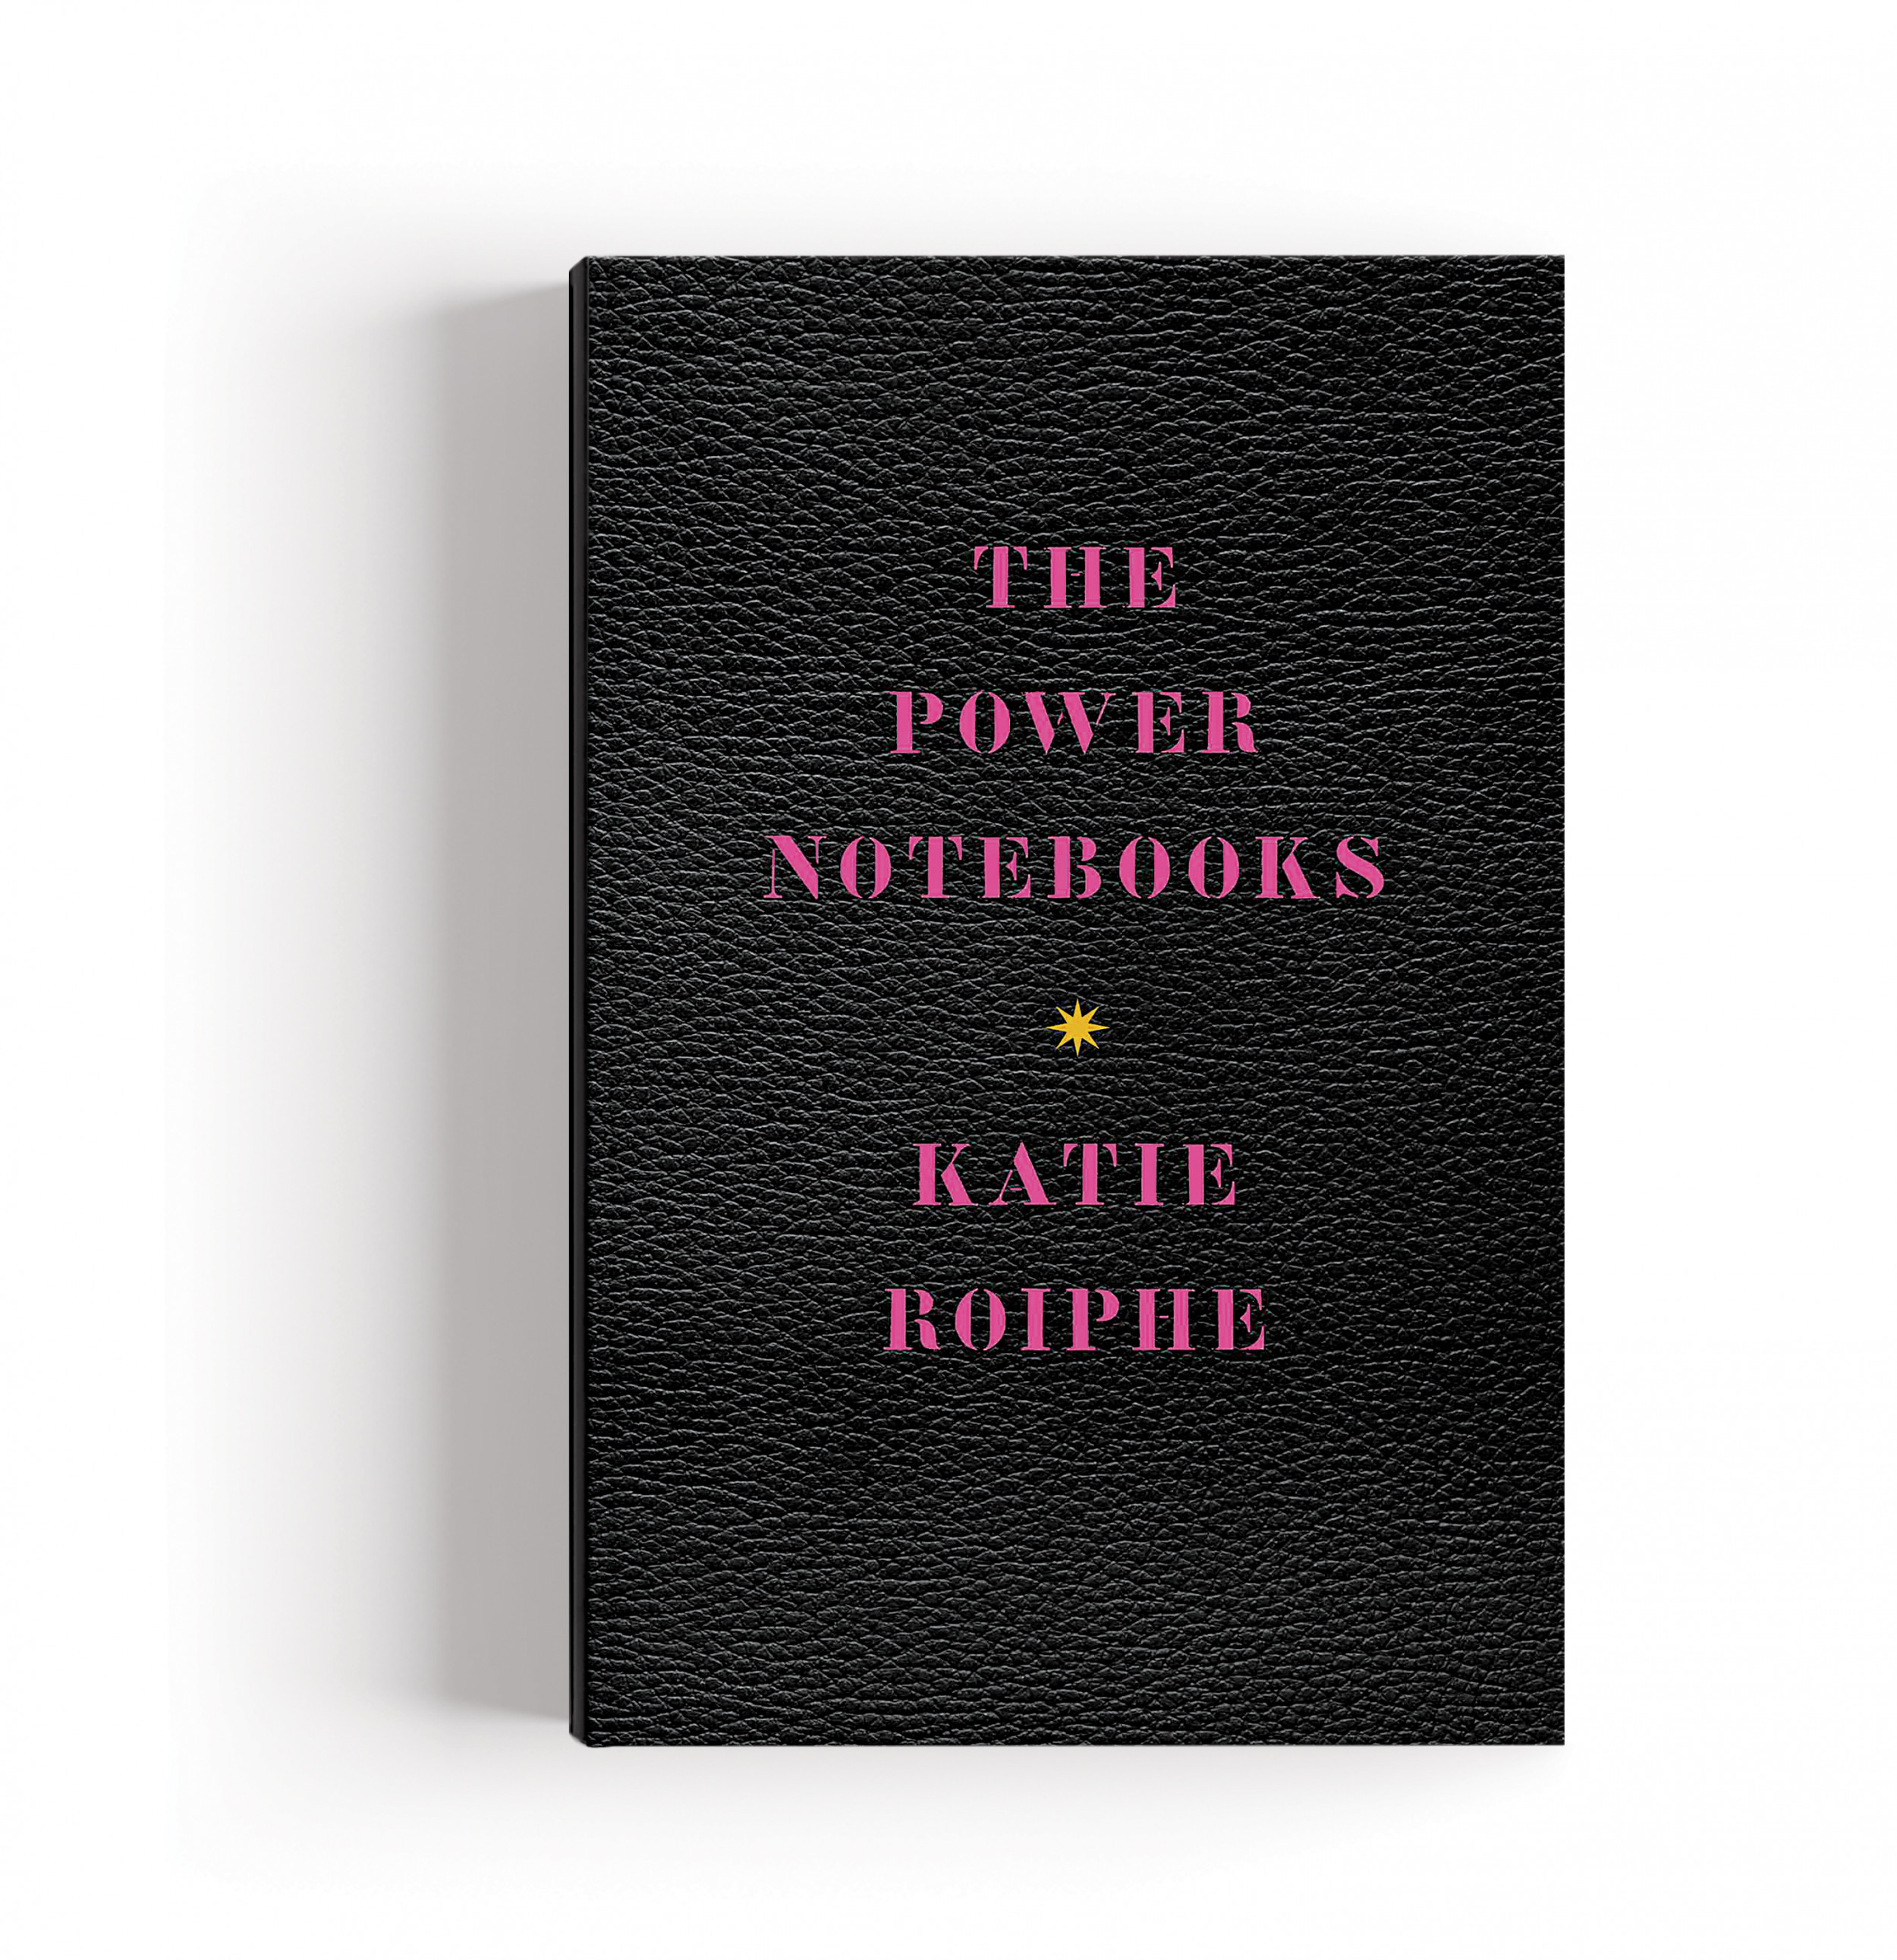 the power notebooks by katie roiphe